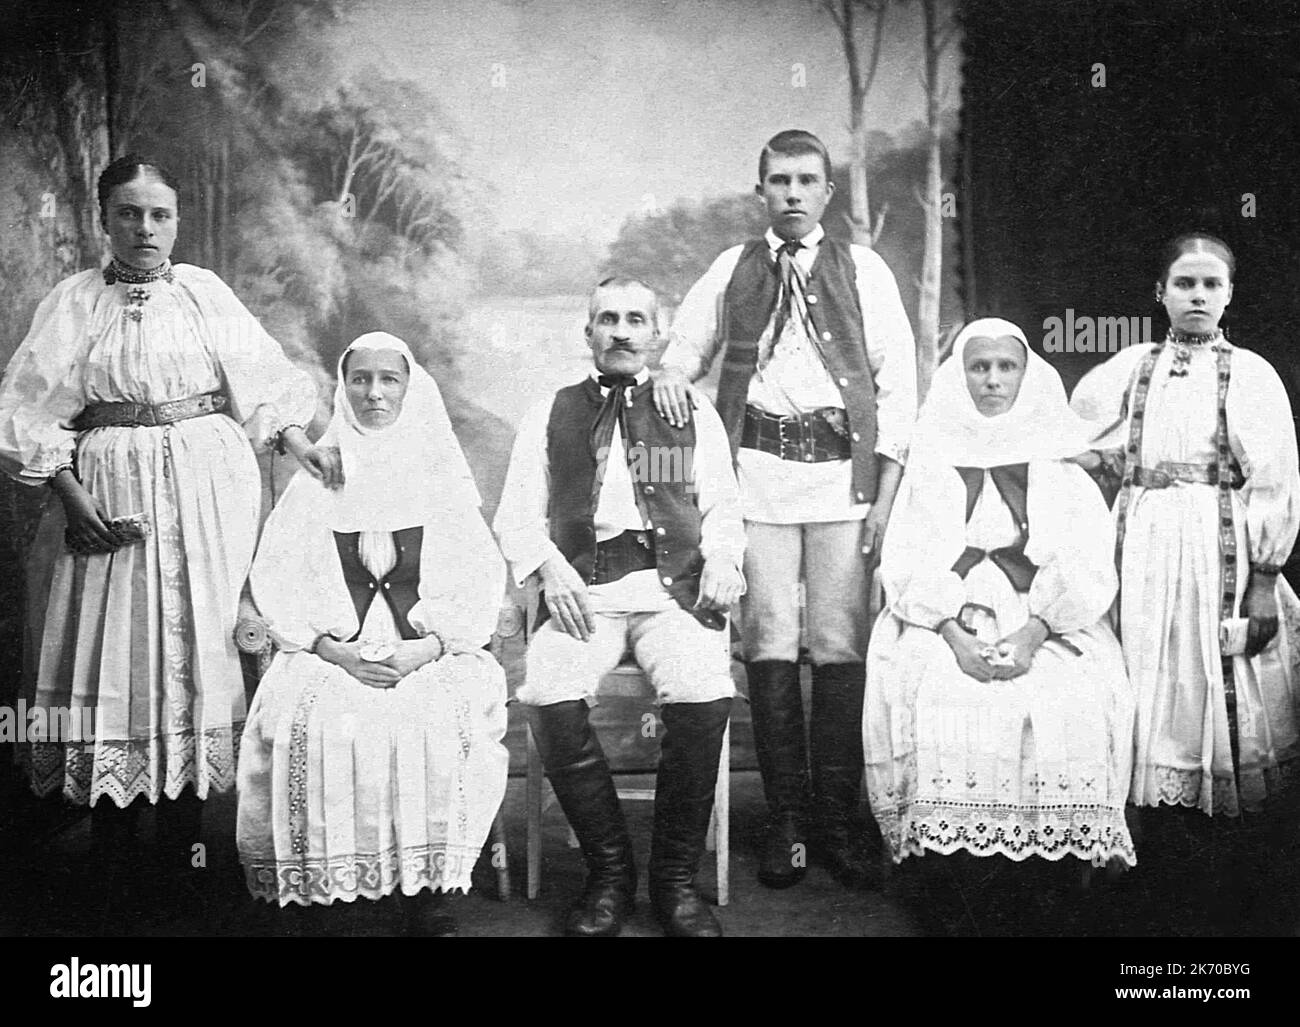 Members of the Saxon community in traditional folk costumes posing for a photography. Black & white vintage photo from the first half of the 19th century in Brasov County, Transylvania, Romania. Stock Photo